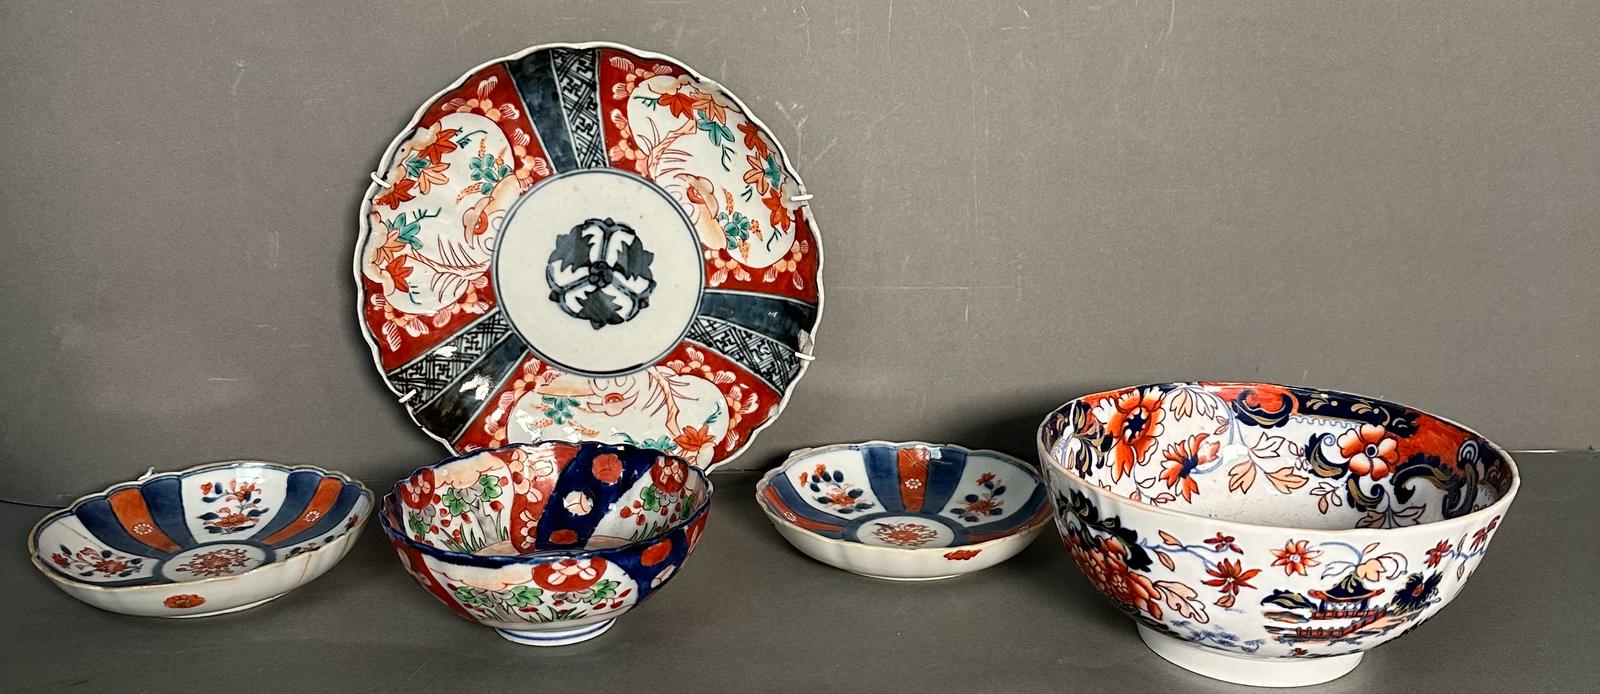 A selection of bowls and dishes in the Imari palette, various ages and styles - Image 5 of 8